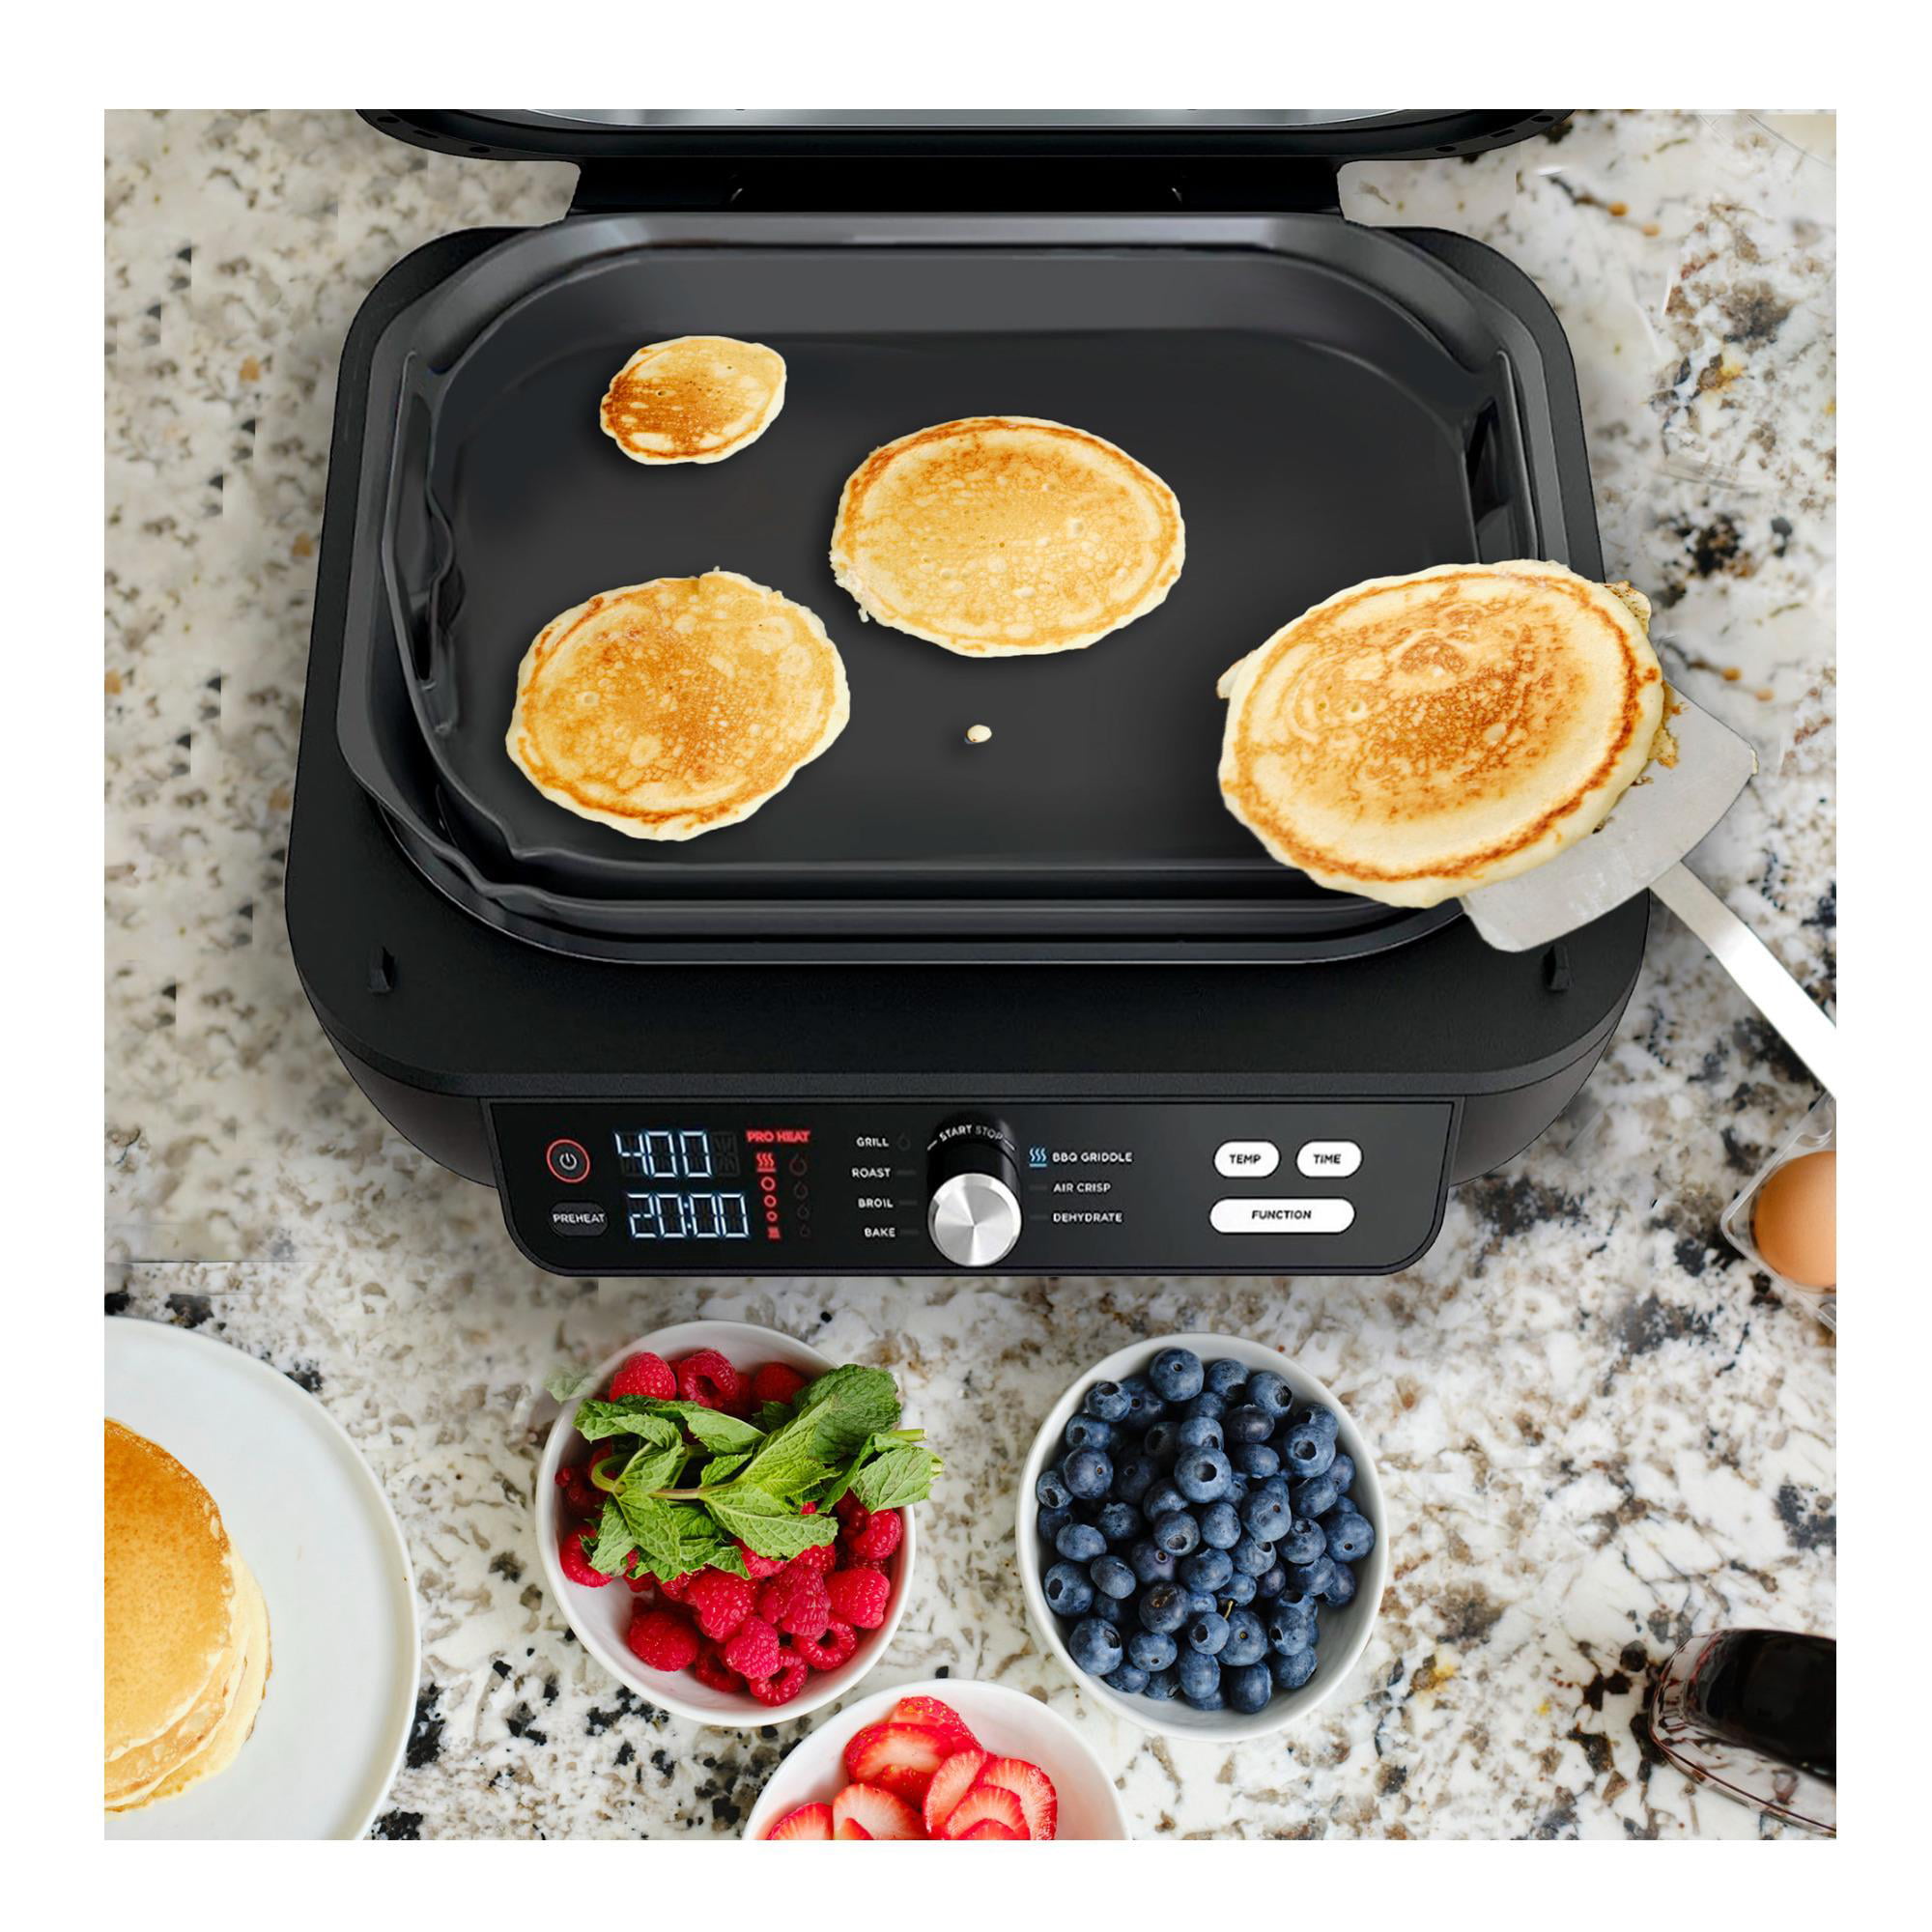  Ninja IG601 Foodi XL 7-in-1 Electric Indoor Grill Combo, use  Opened or Closed, Air Fry, Dehydrate & More, Pro Power Grate, Flat Top  Griddle, Crisper, Black, 4 Quarts: Home & Kitchen